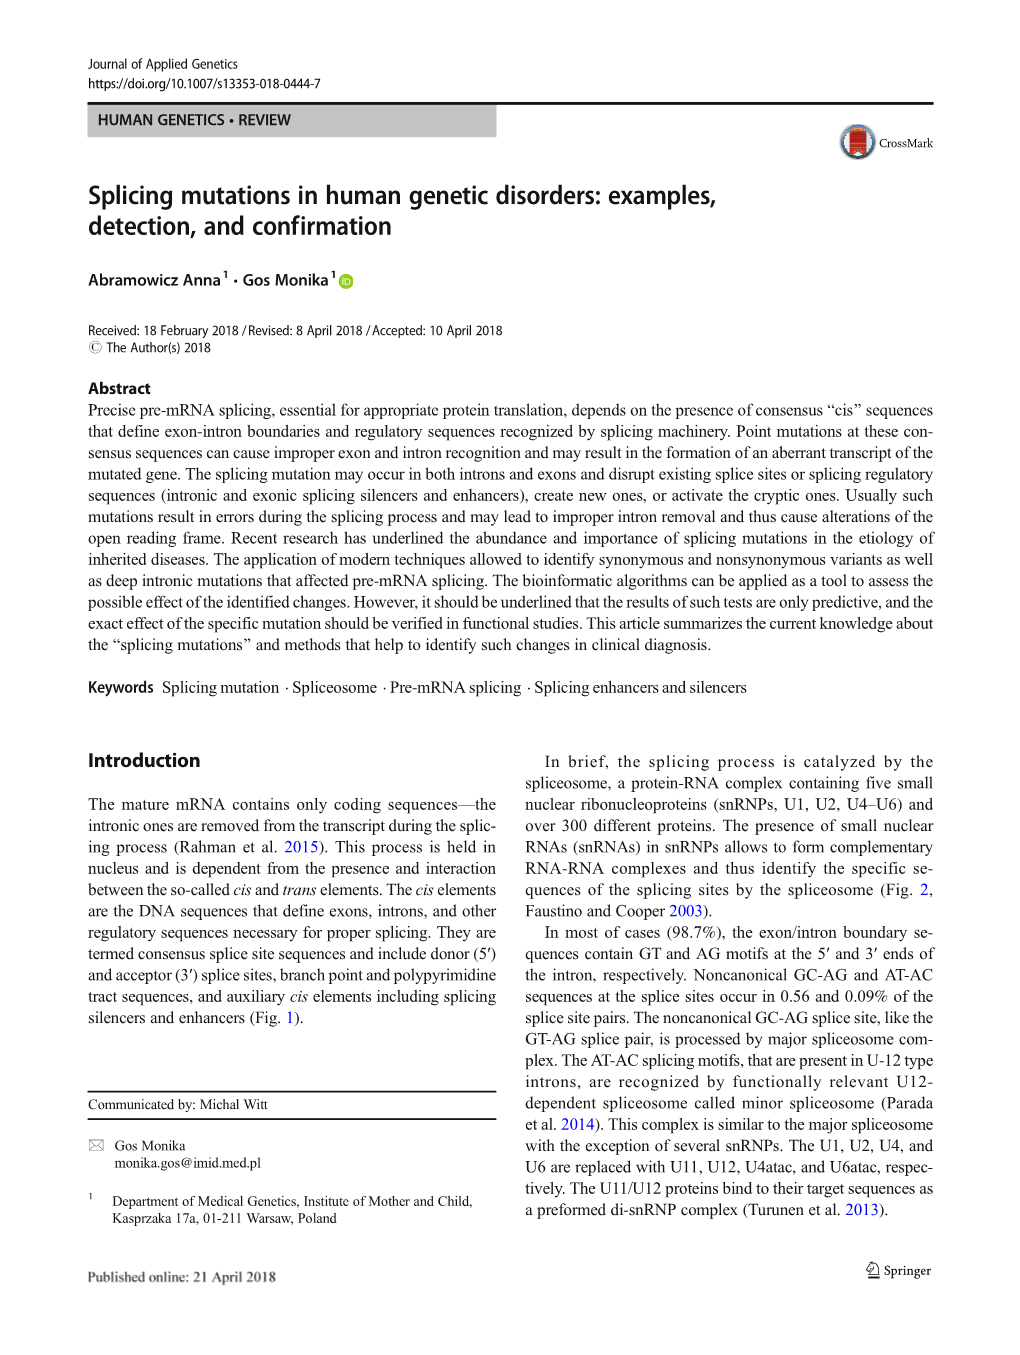 Splicing Mutations in Human Genetic Disorders: Examples, Detection, and Confirmation